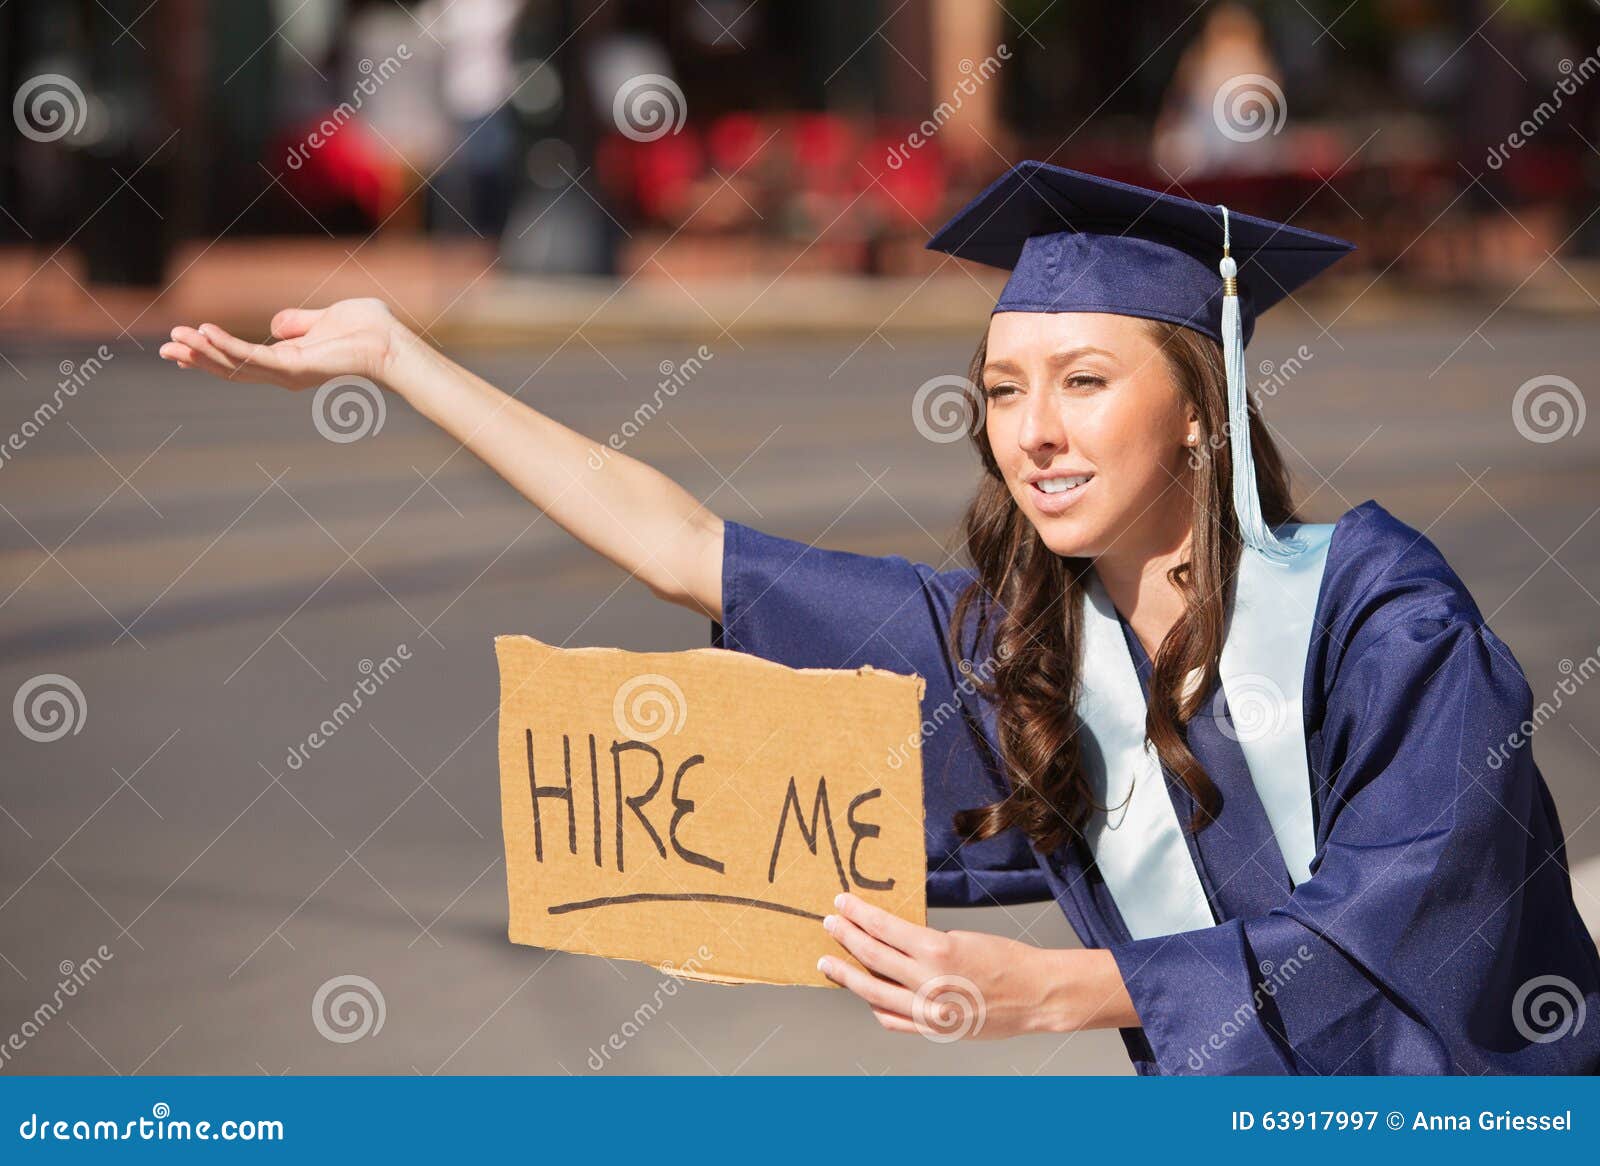 graduate with hire me sign